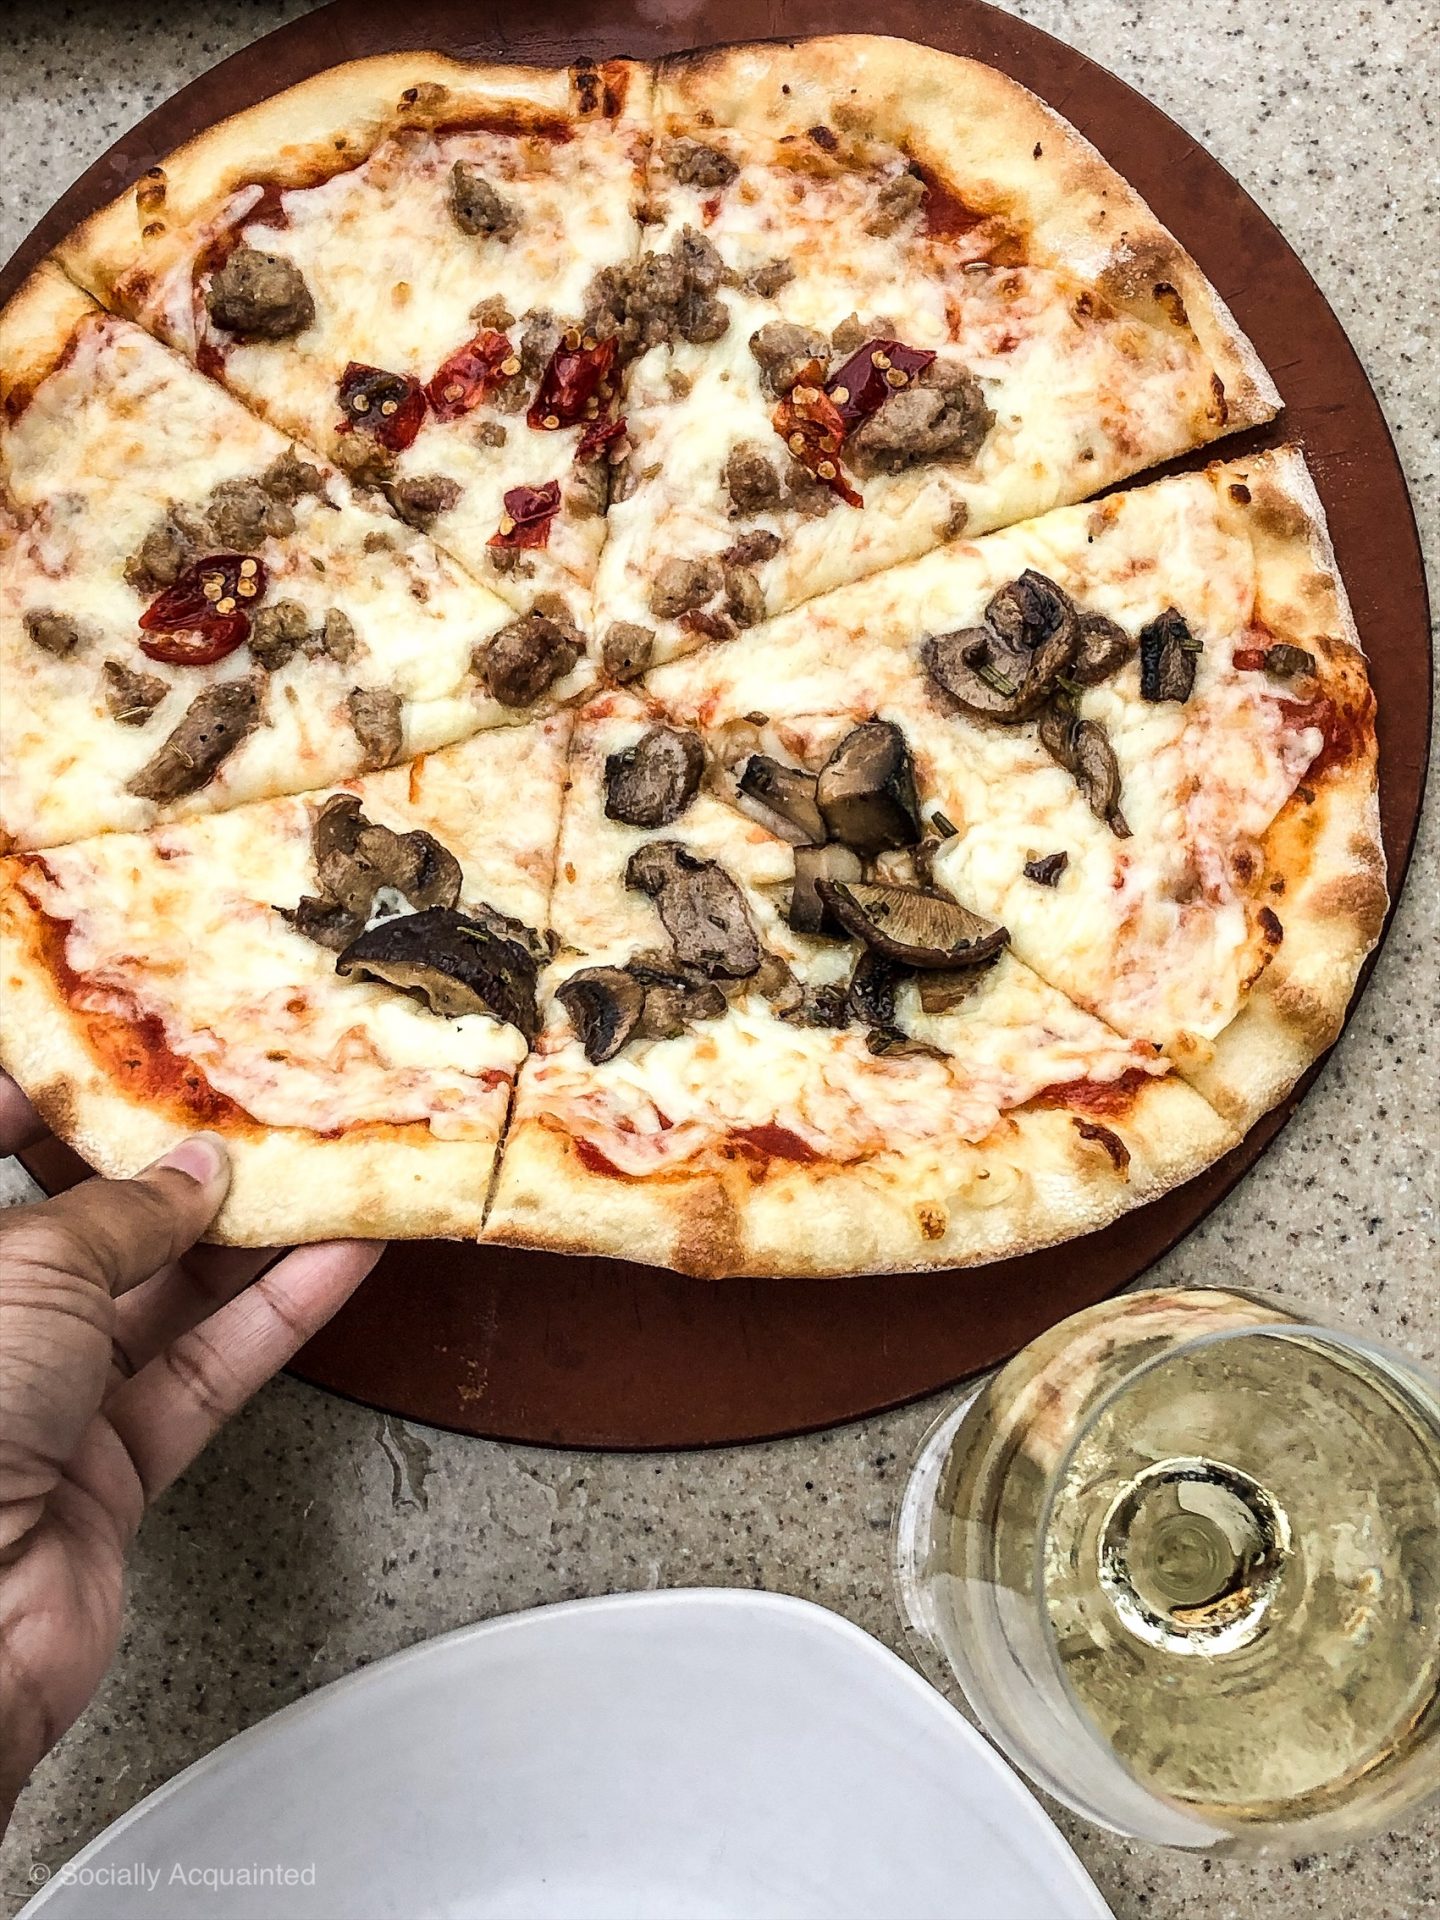 Half funghi, half sausage pizza and a glass of Moscato